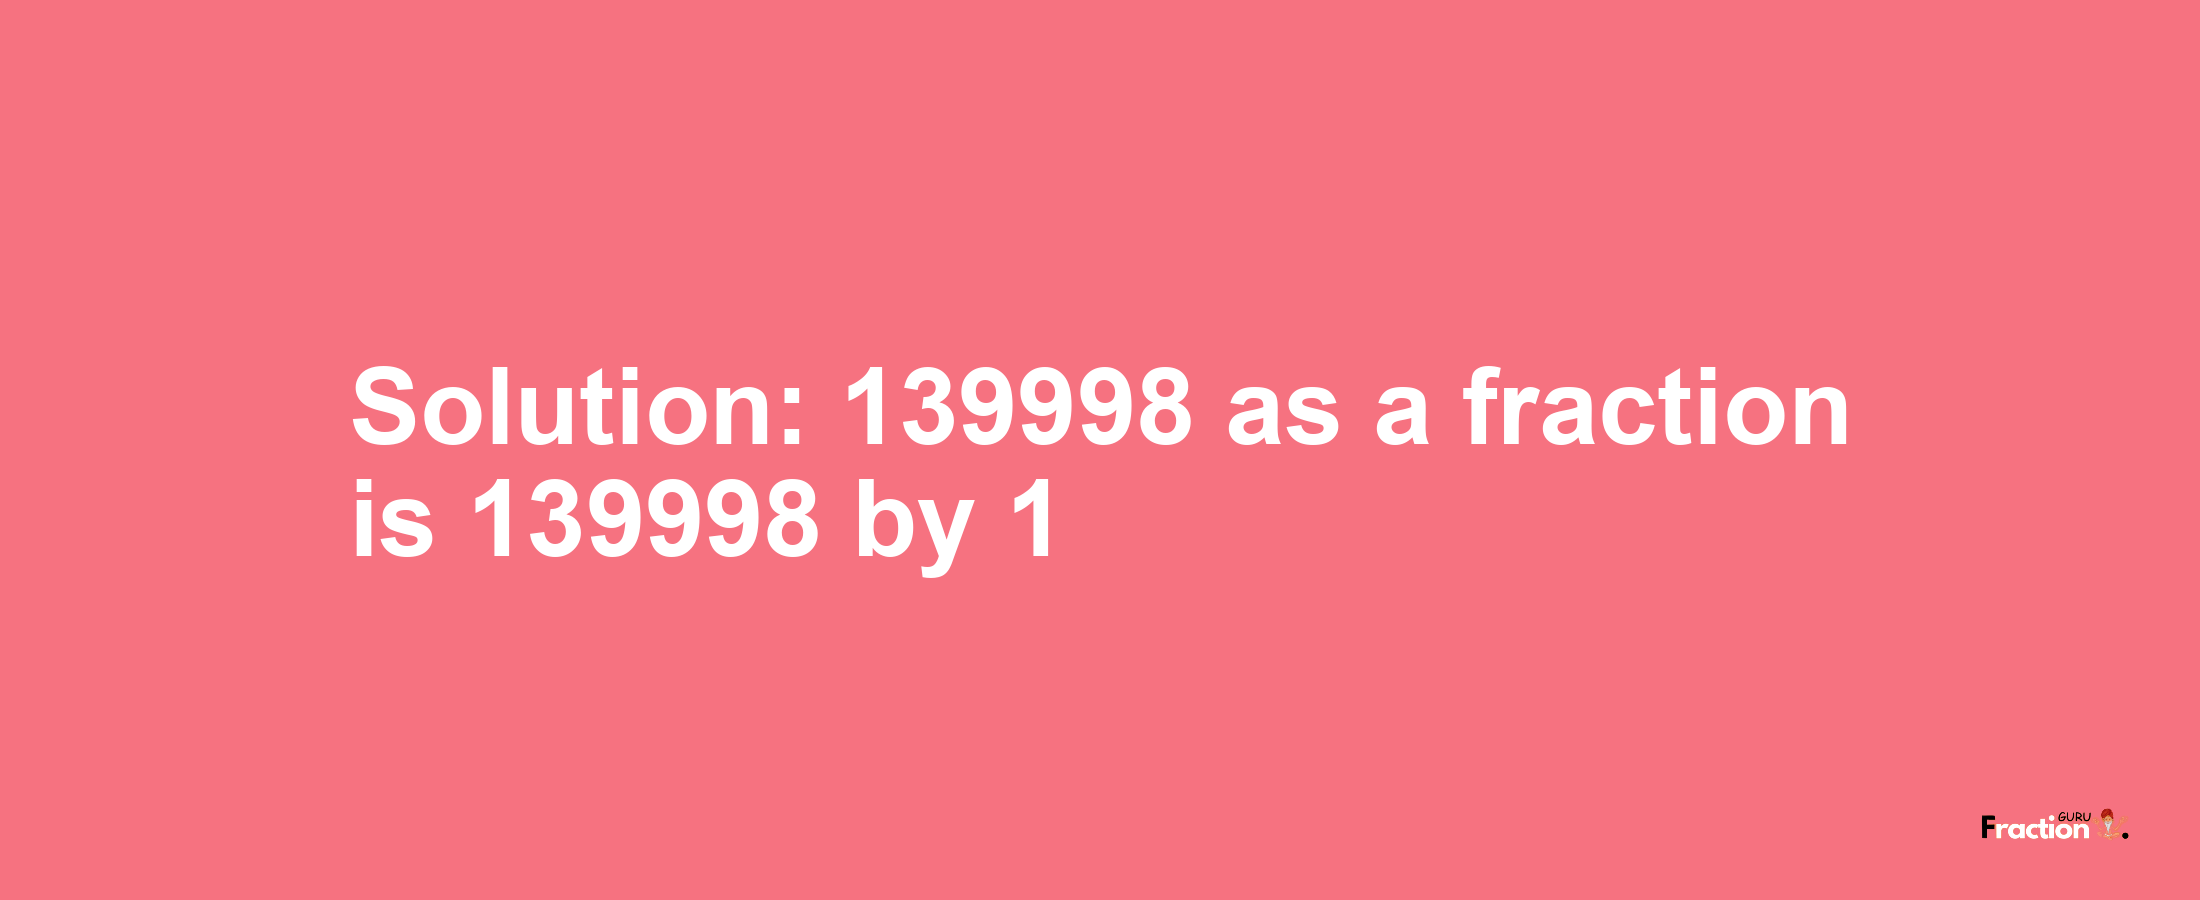 Solution:139998 as a fraction is 139998/1